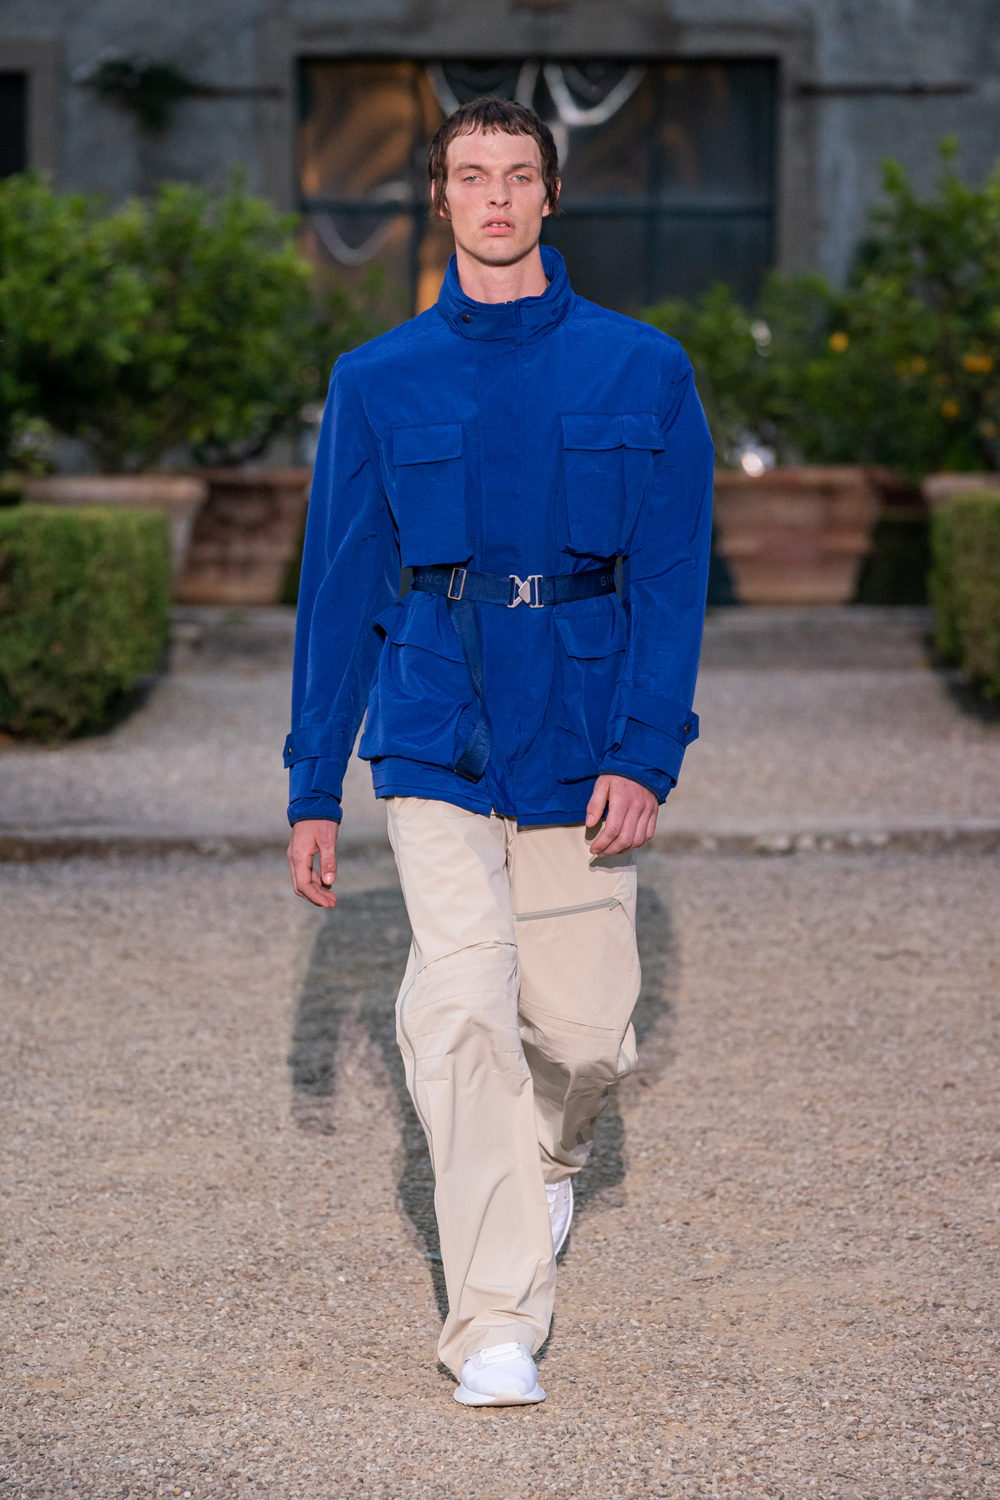 Florence: Givenchy S/S 2020 Men's Collection | superfuture®